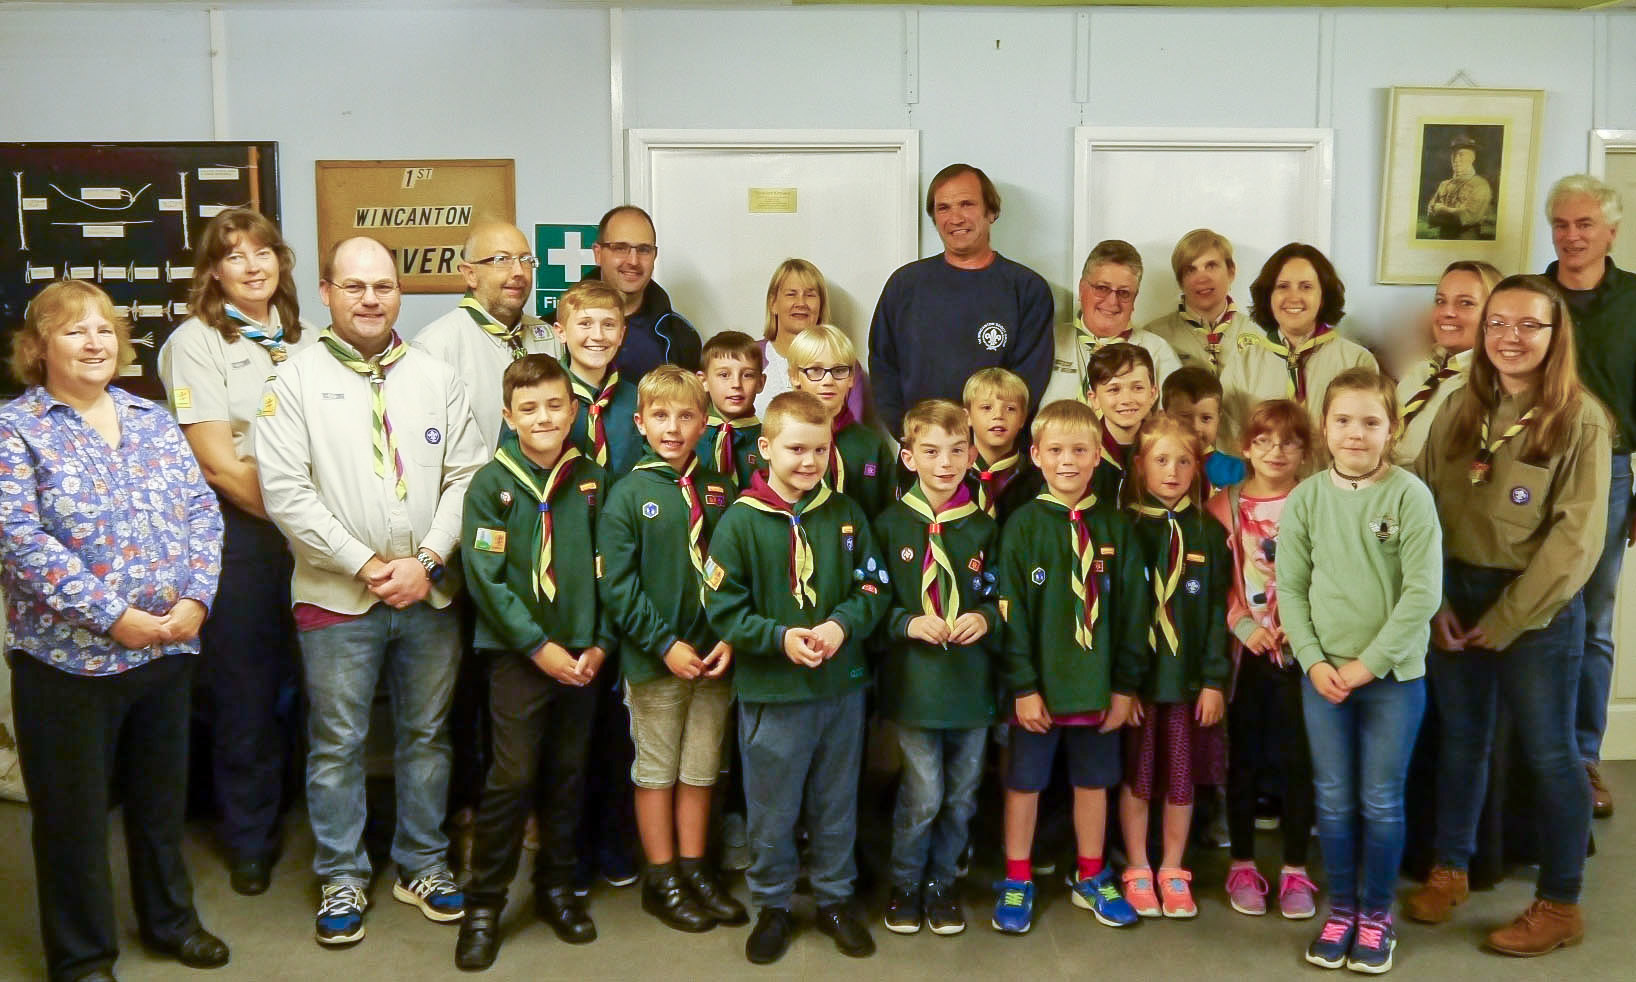 1st Wincanton Scout Group at the last event in 2019 before COVID struck